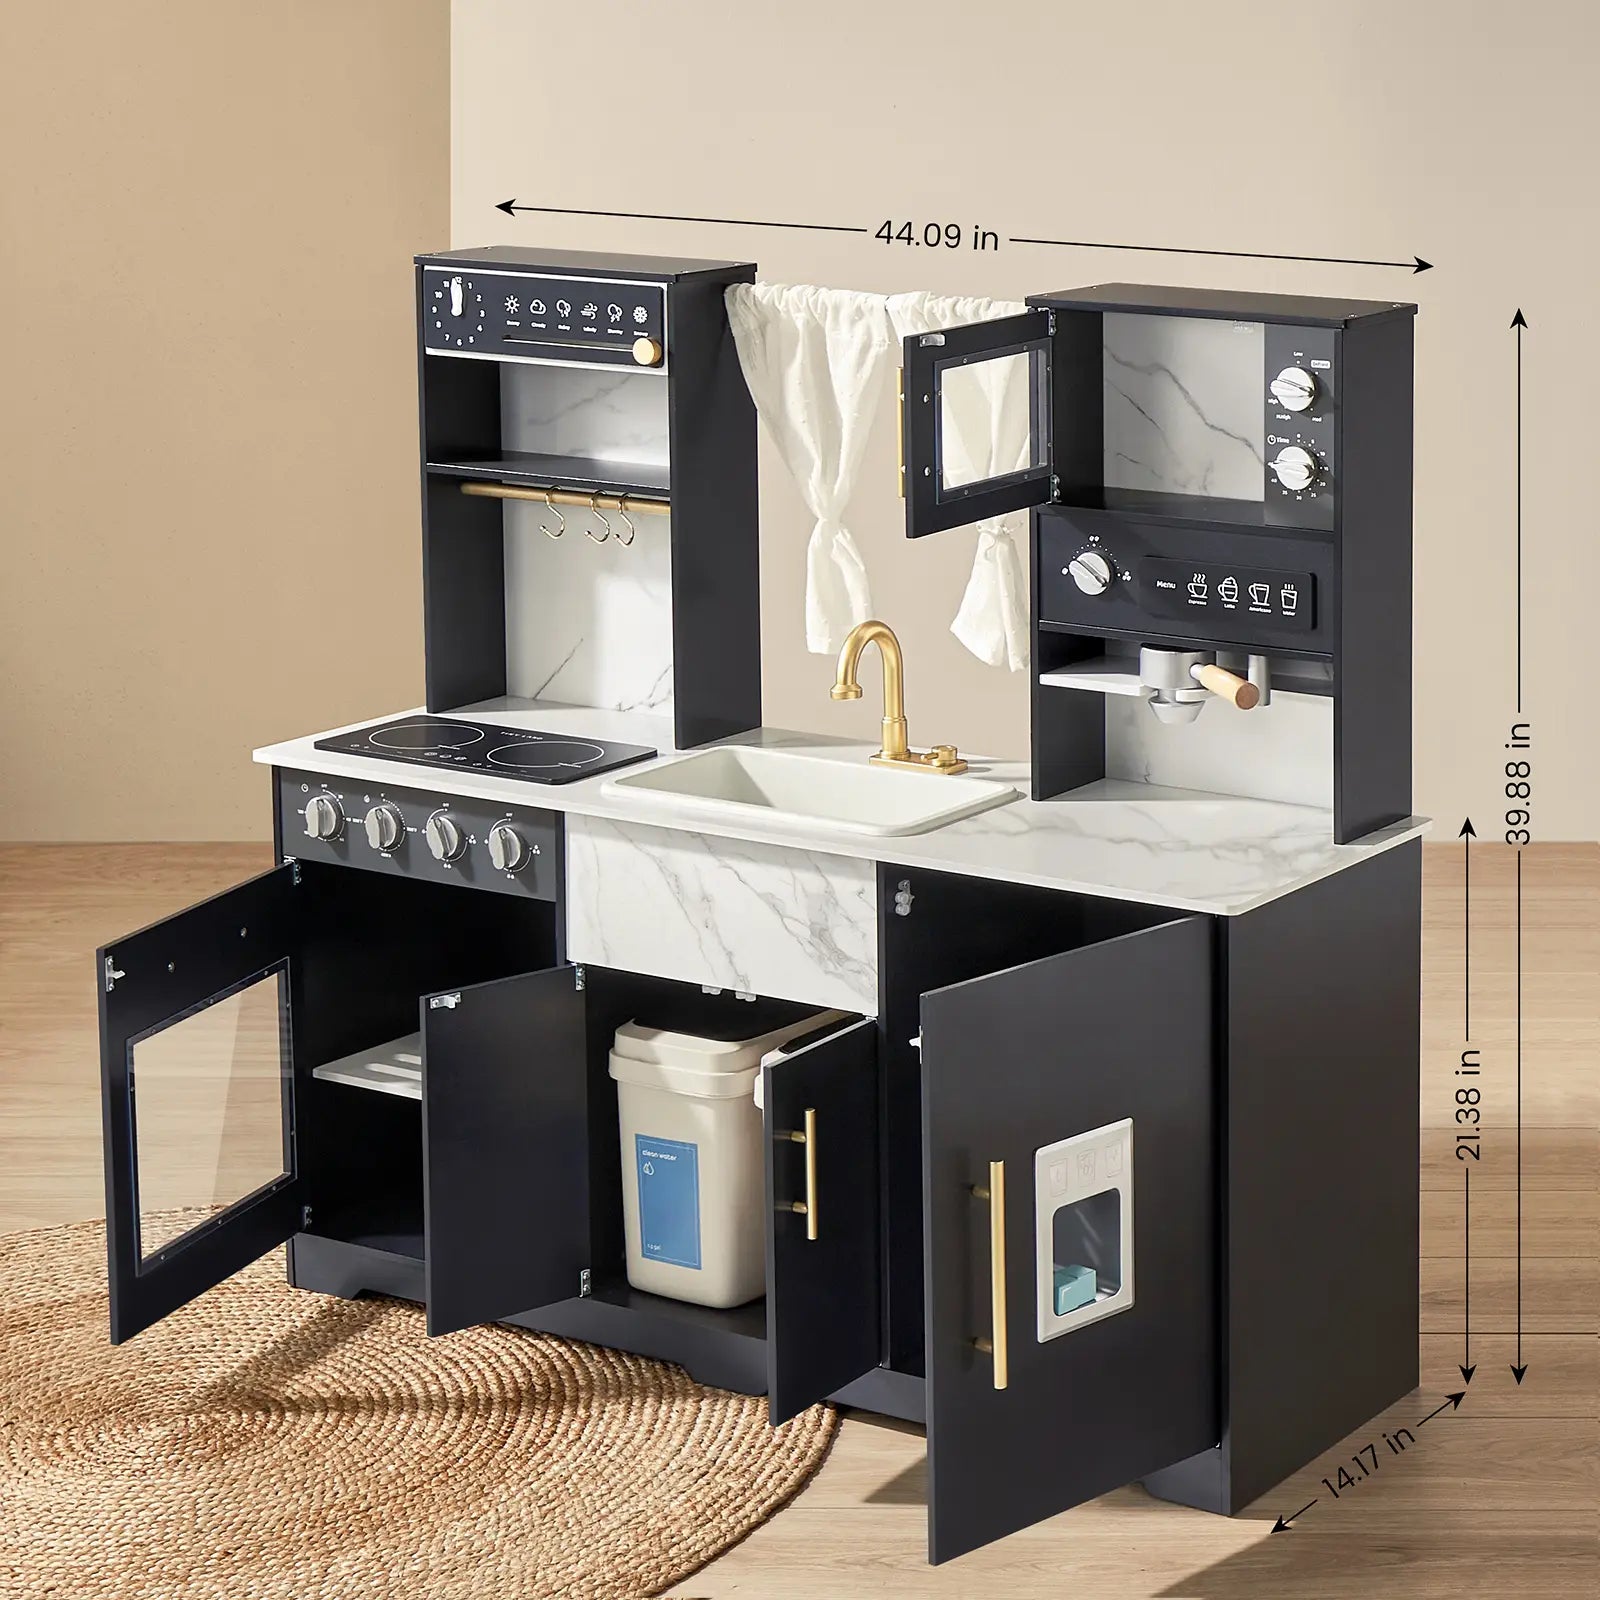 Tiny Land® Black Trendy Play Kitchen with Real-Flow Water System